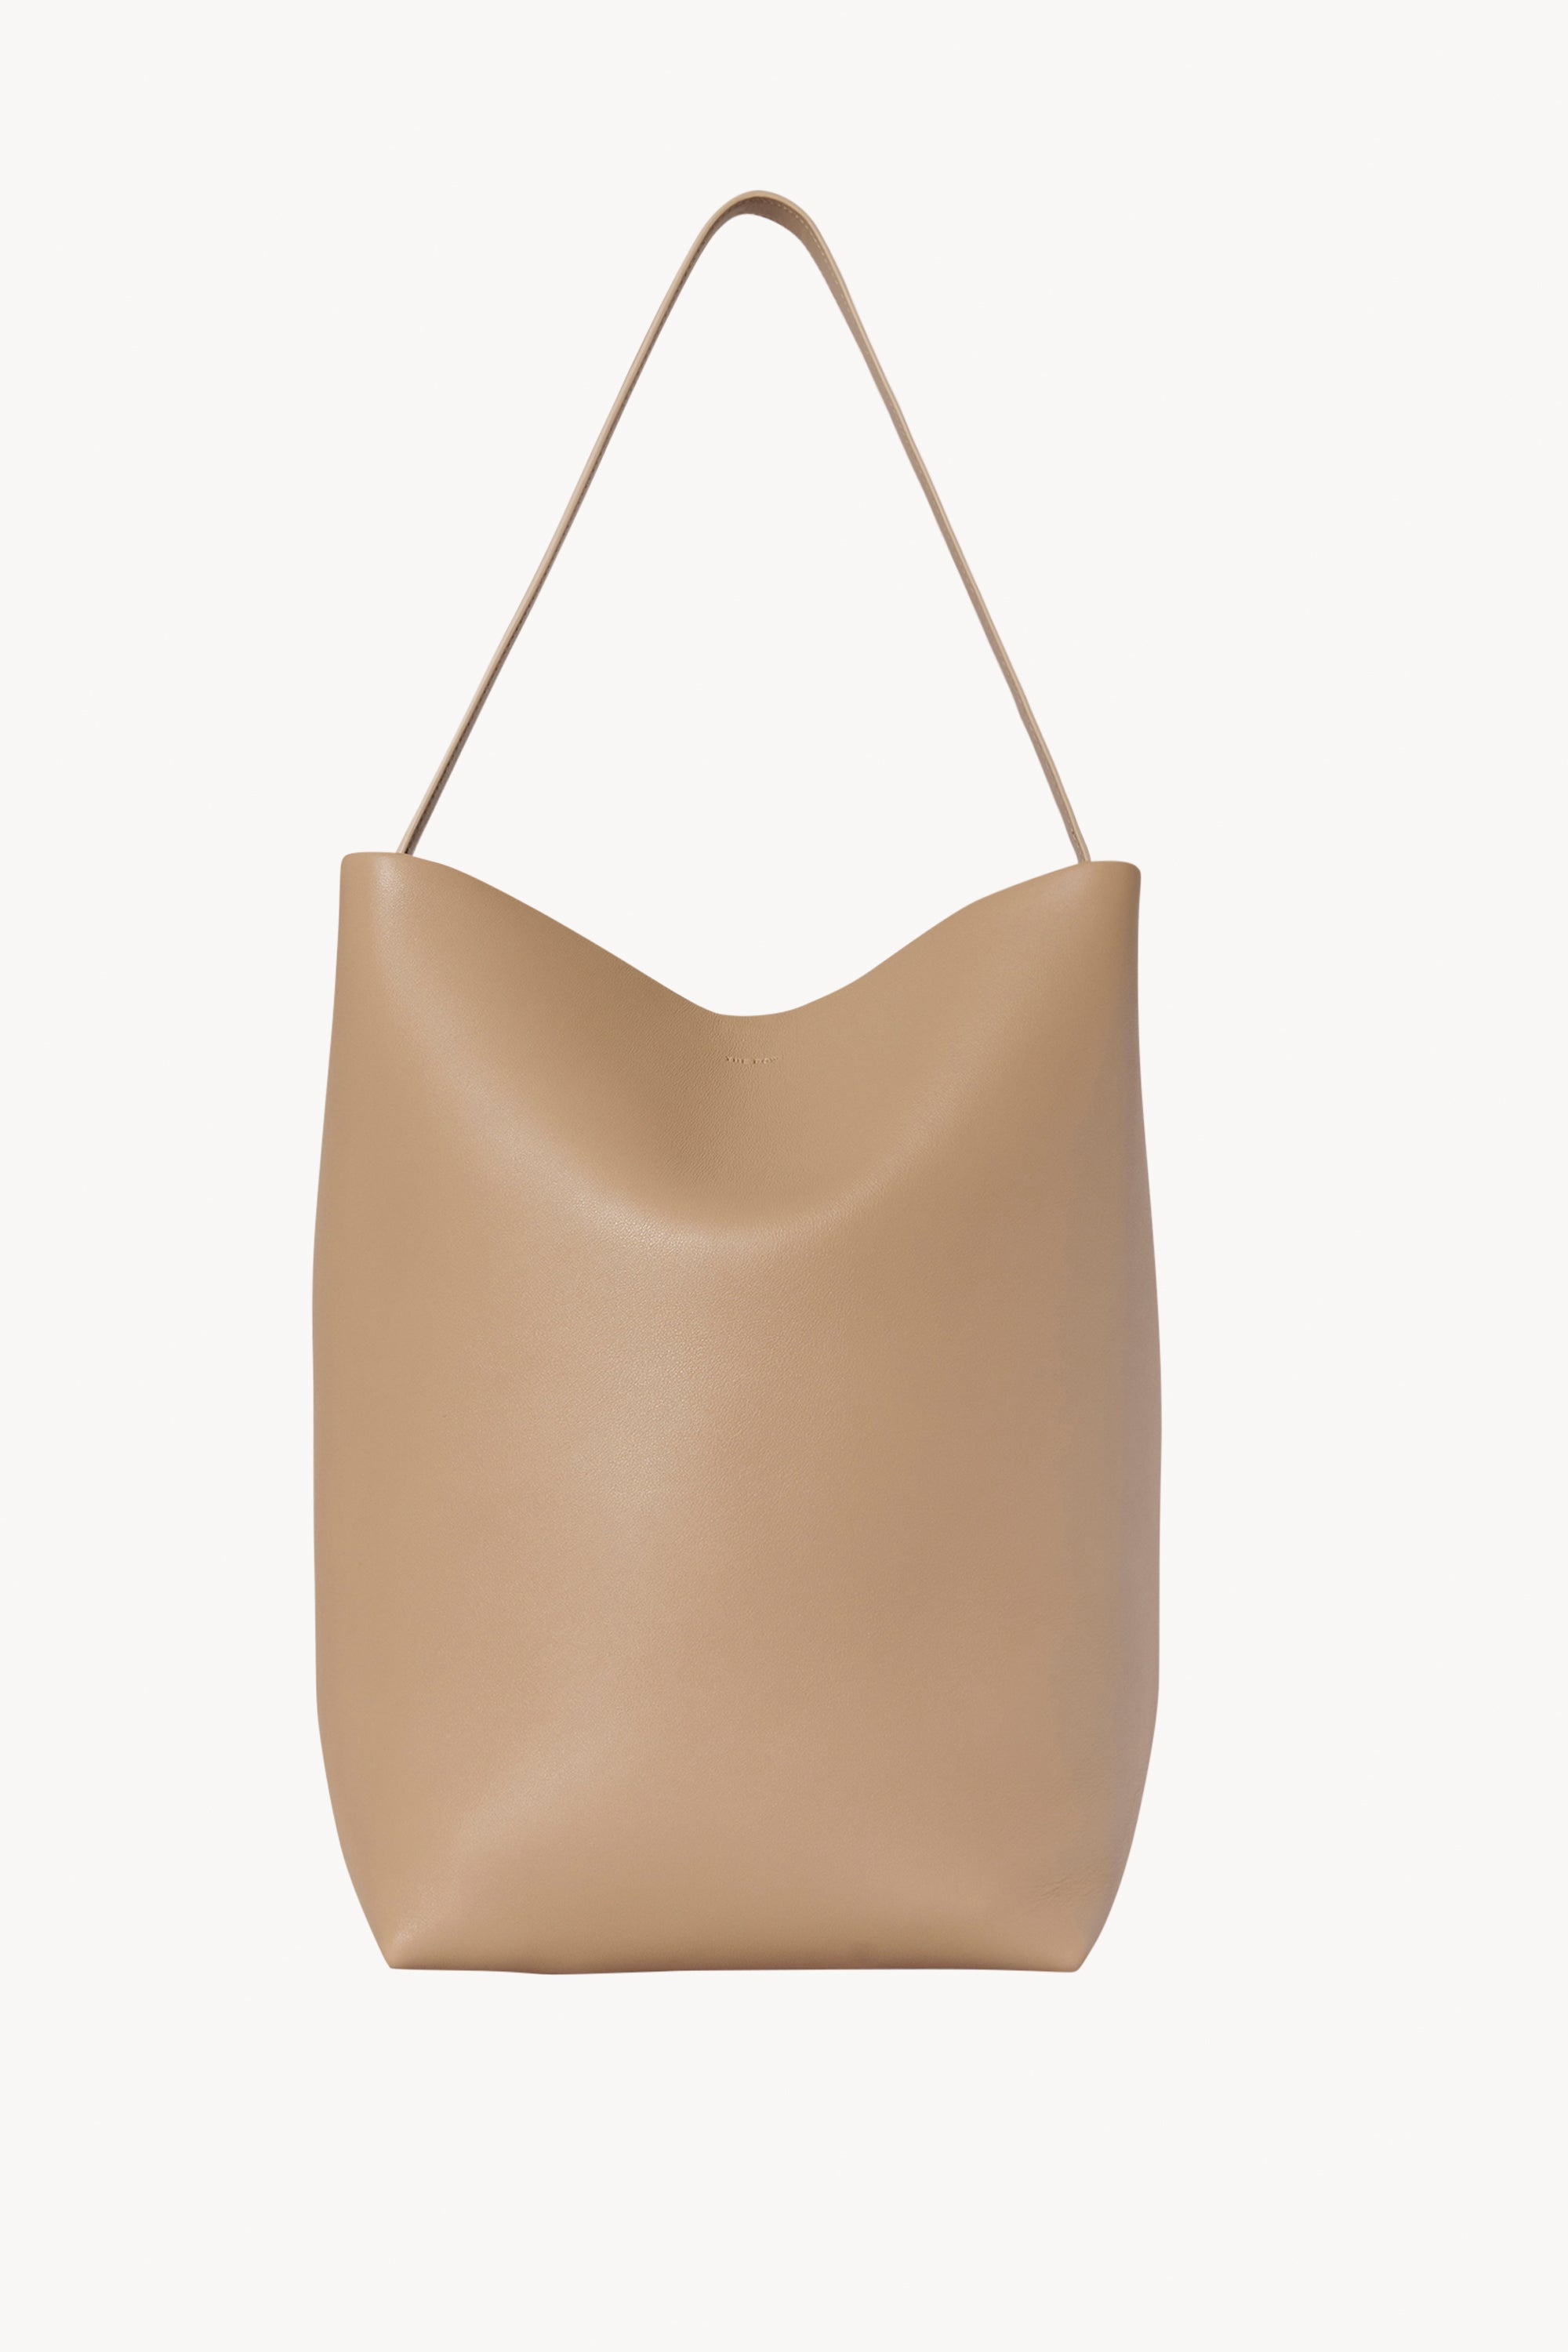 The Row Taupe Large N/S Park Tote Bag